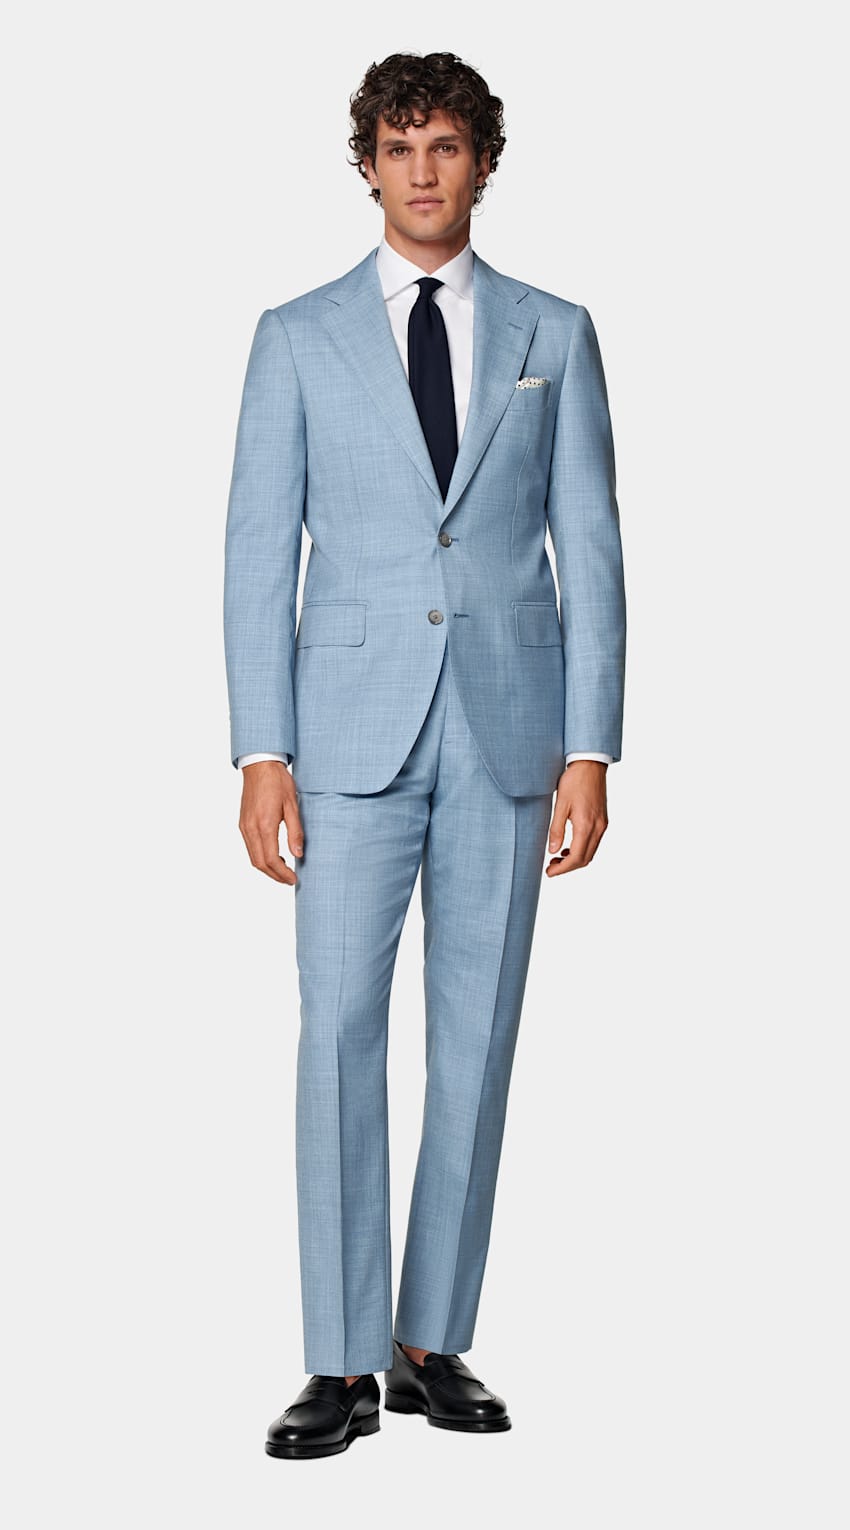 SUITSUPPLY All Season Pure Tropical Wool by Vitale Barberis Canonico, Italy Light Blue Perennial Tailored Fit Havana Suit